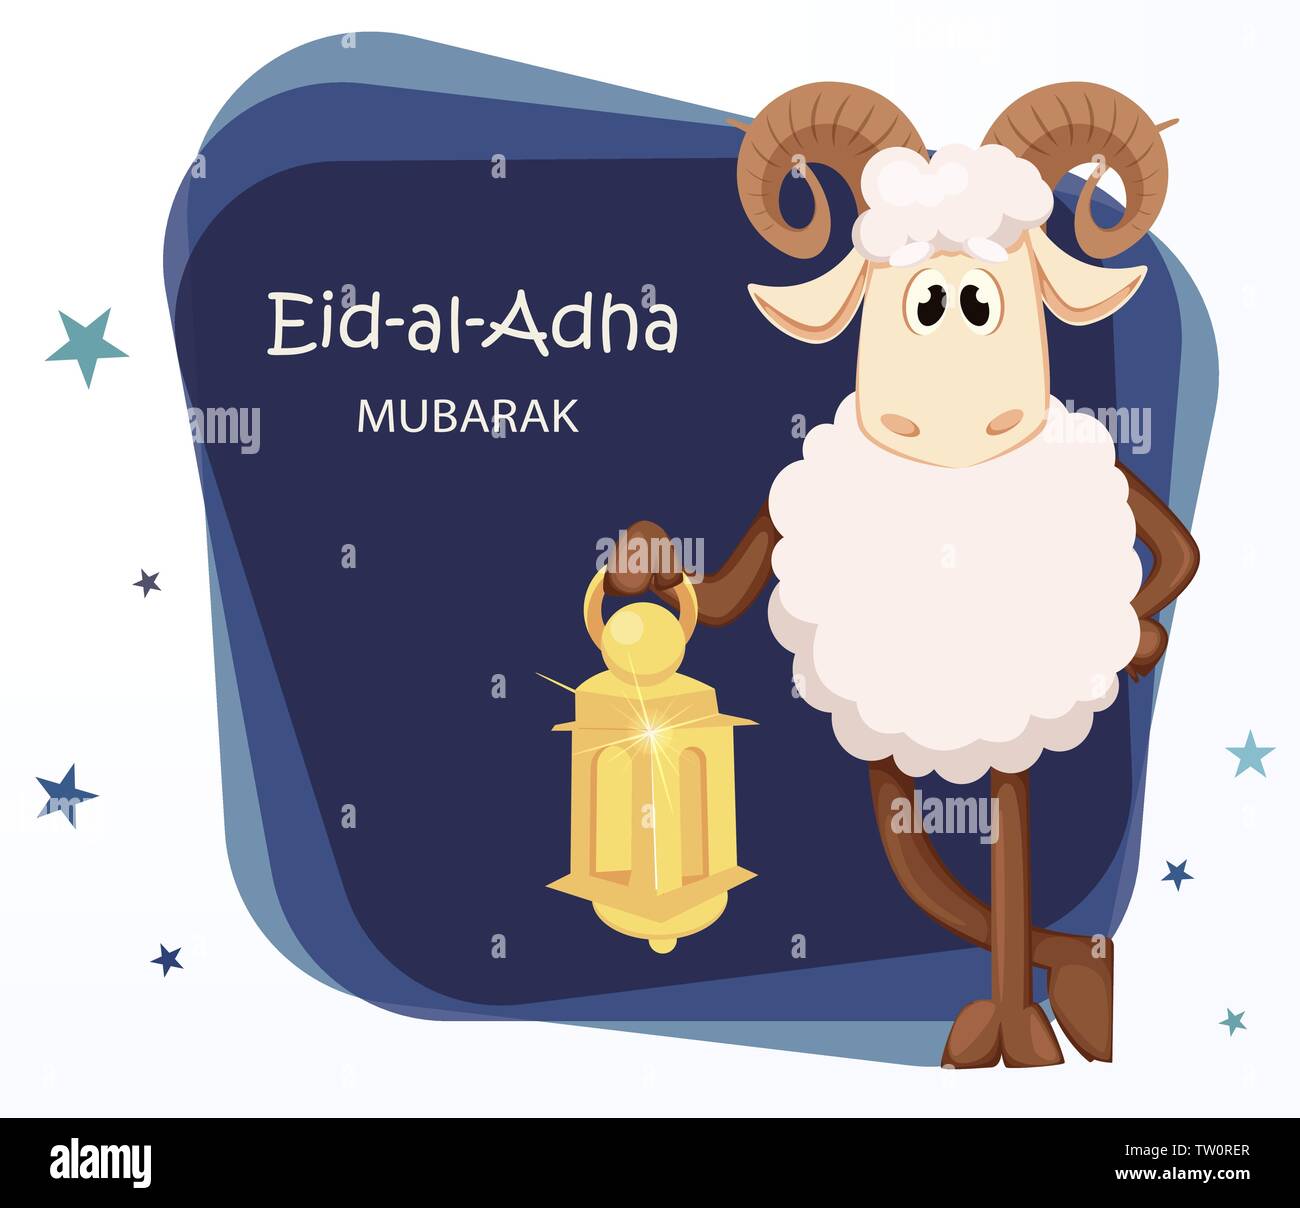 Eid al Adha Mubarak greeting card with funny ram holding lantern. Traditional Muslim holiday. Vector illustration on abstract background Stock Vector